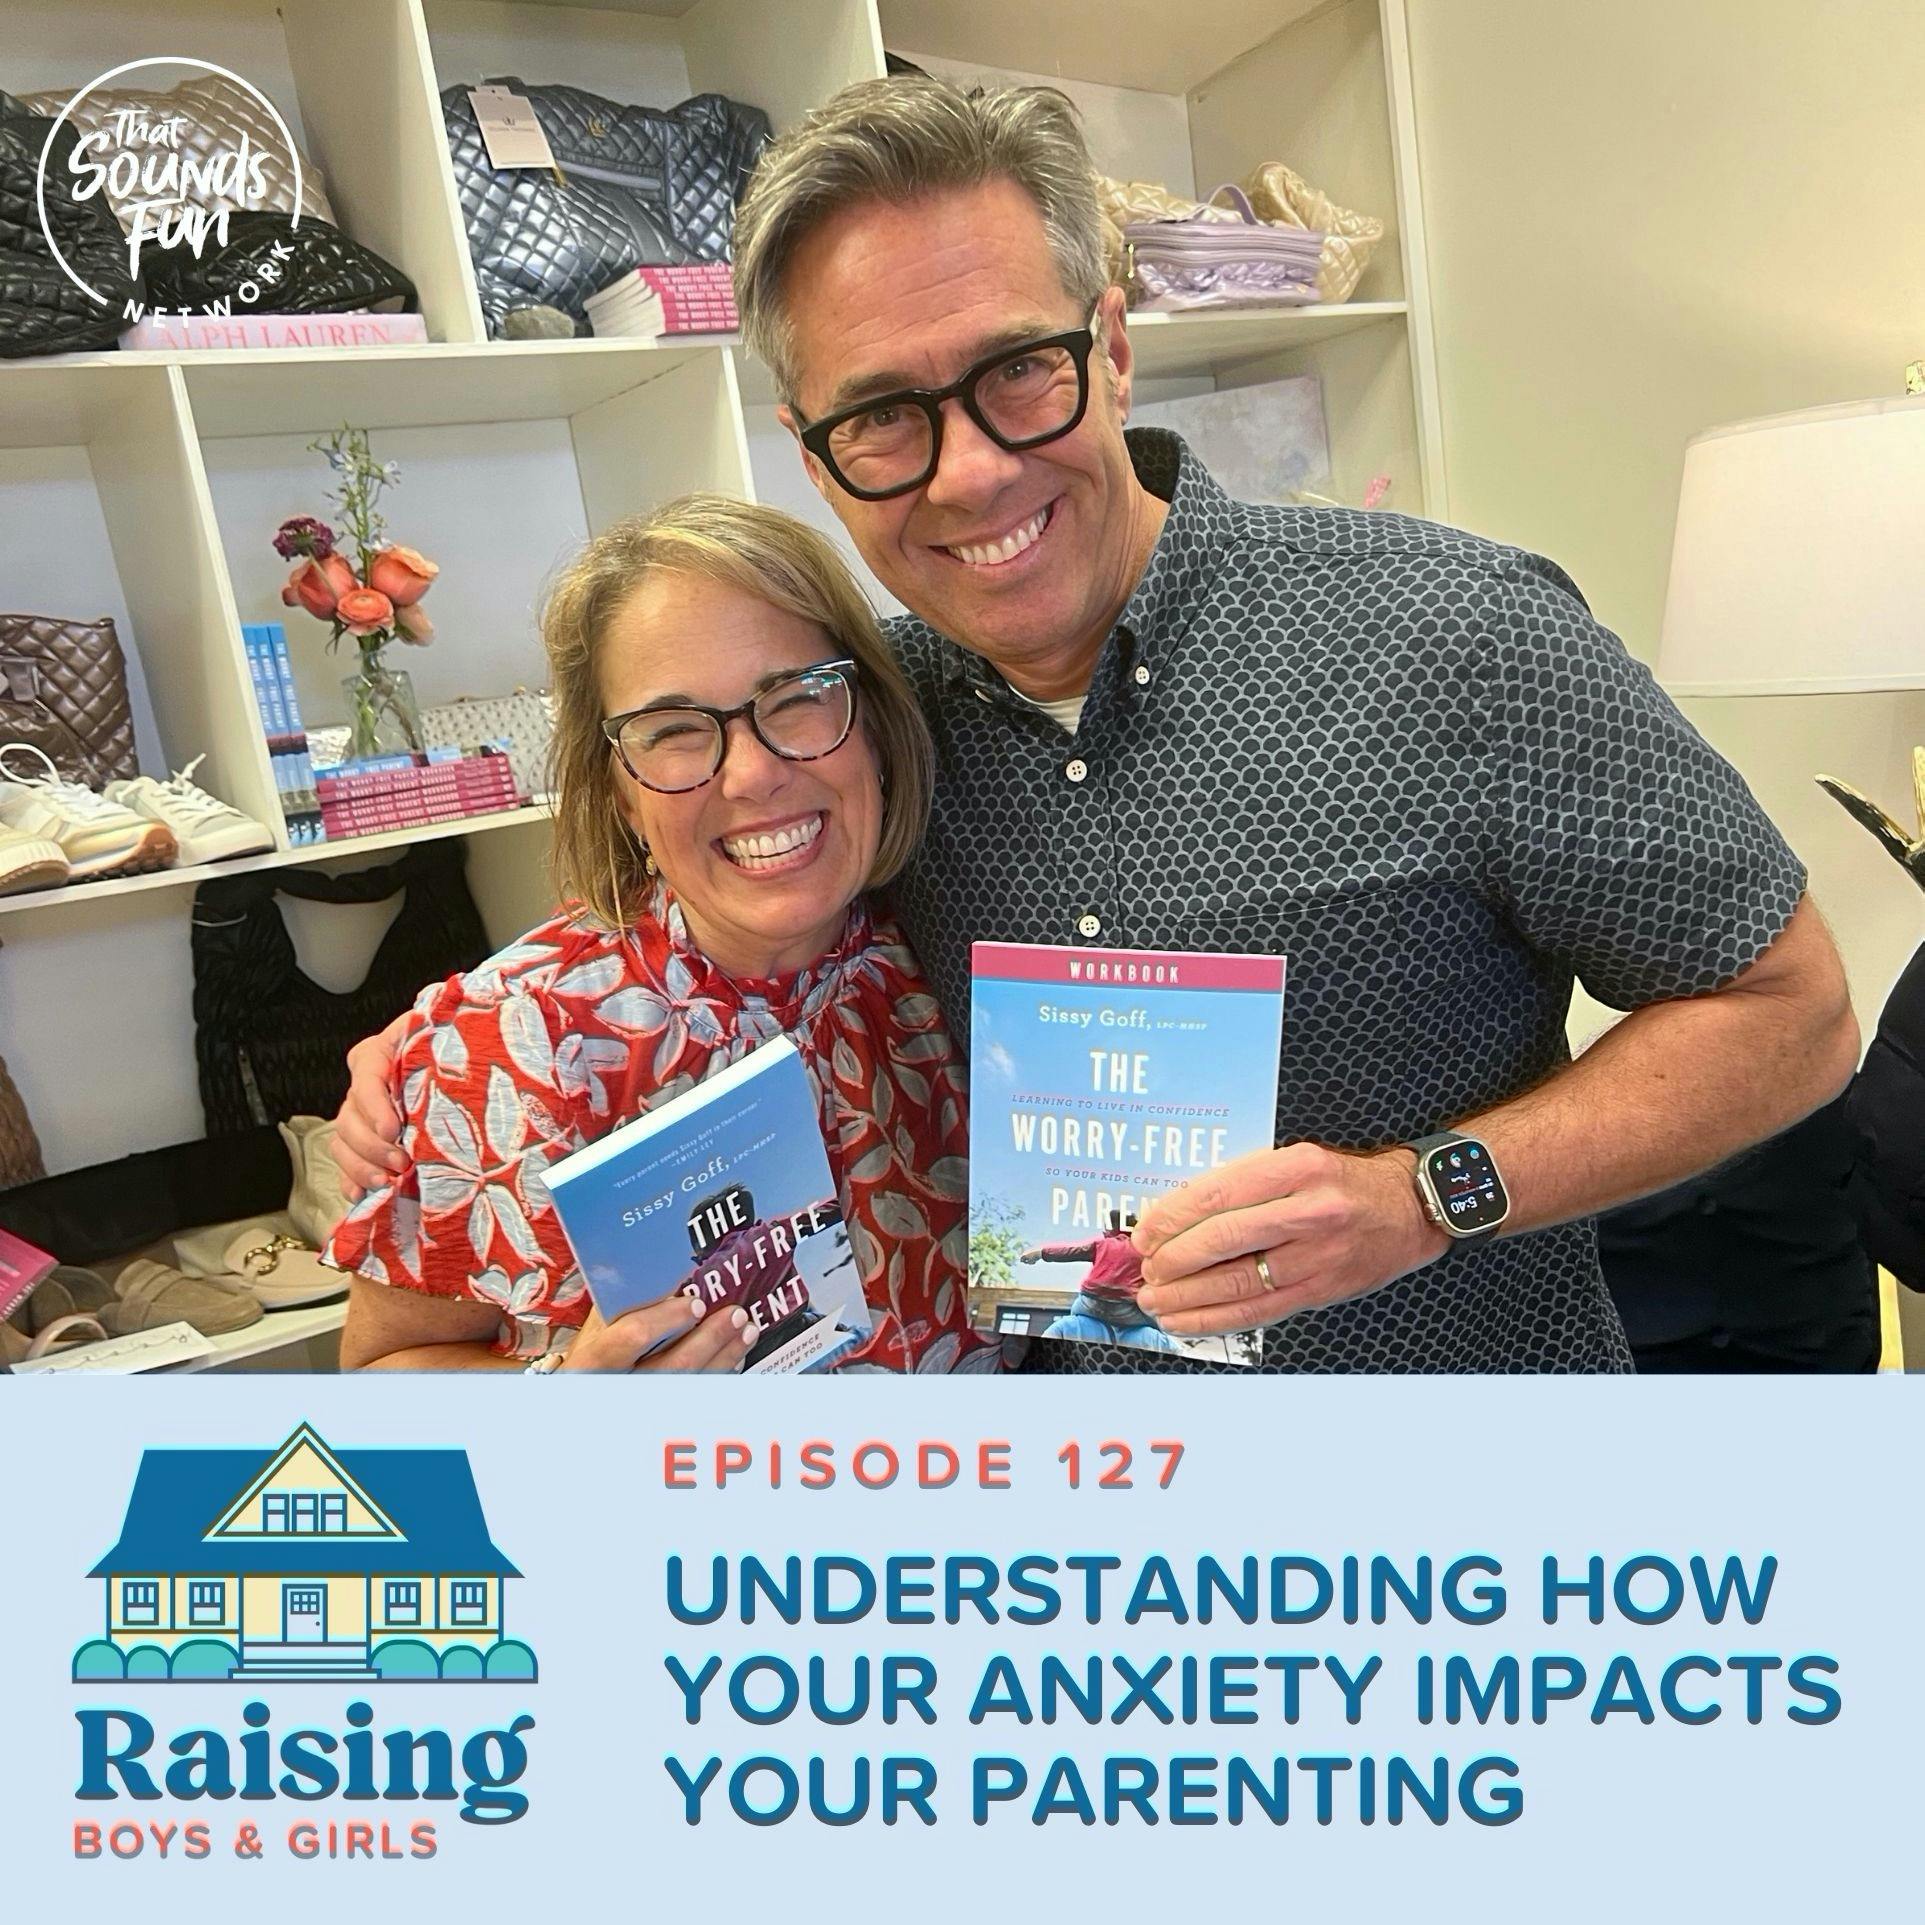 Episode 127: Understanding How Your Anxiety Impacts Your Parenting